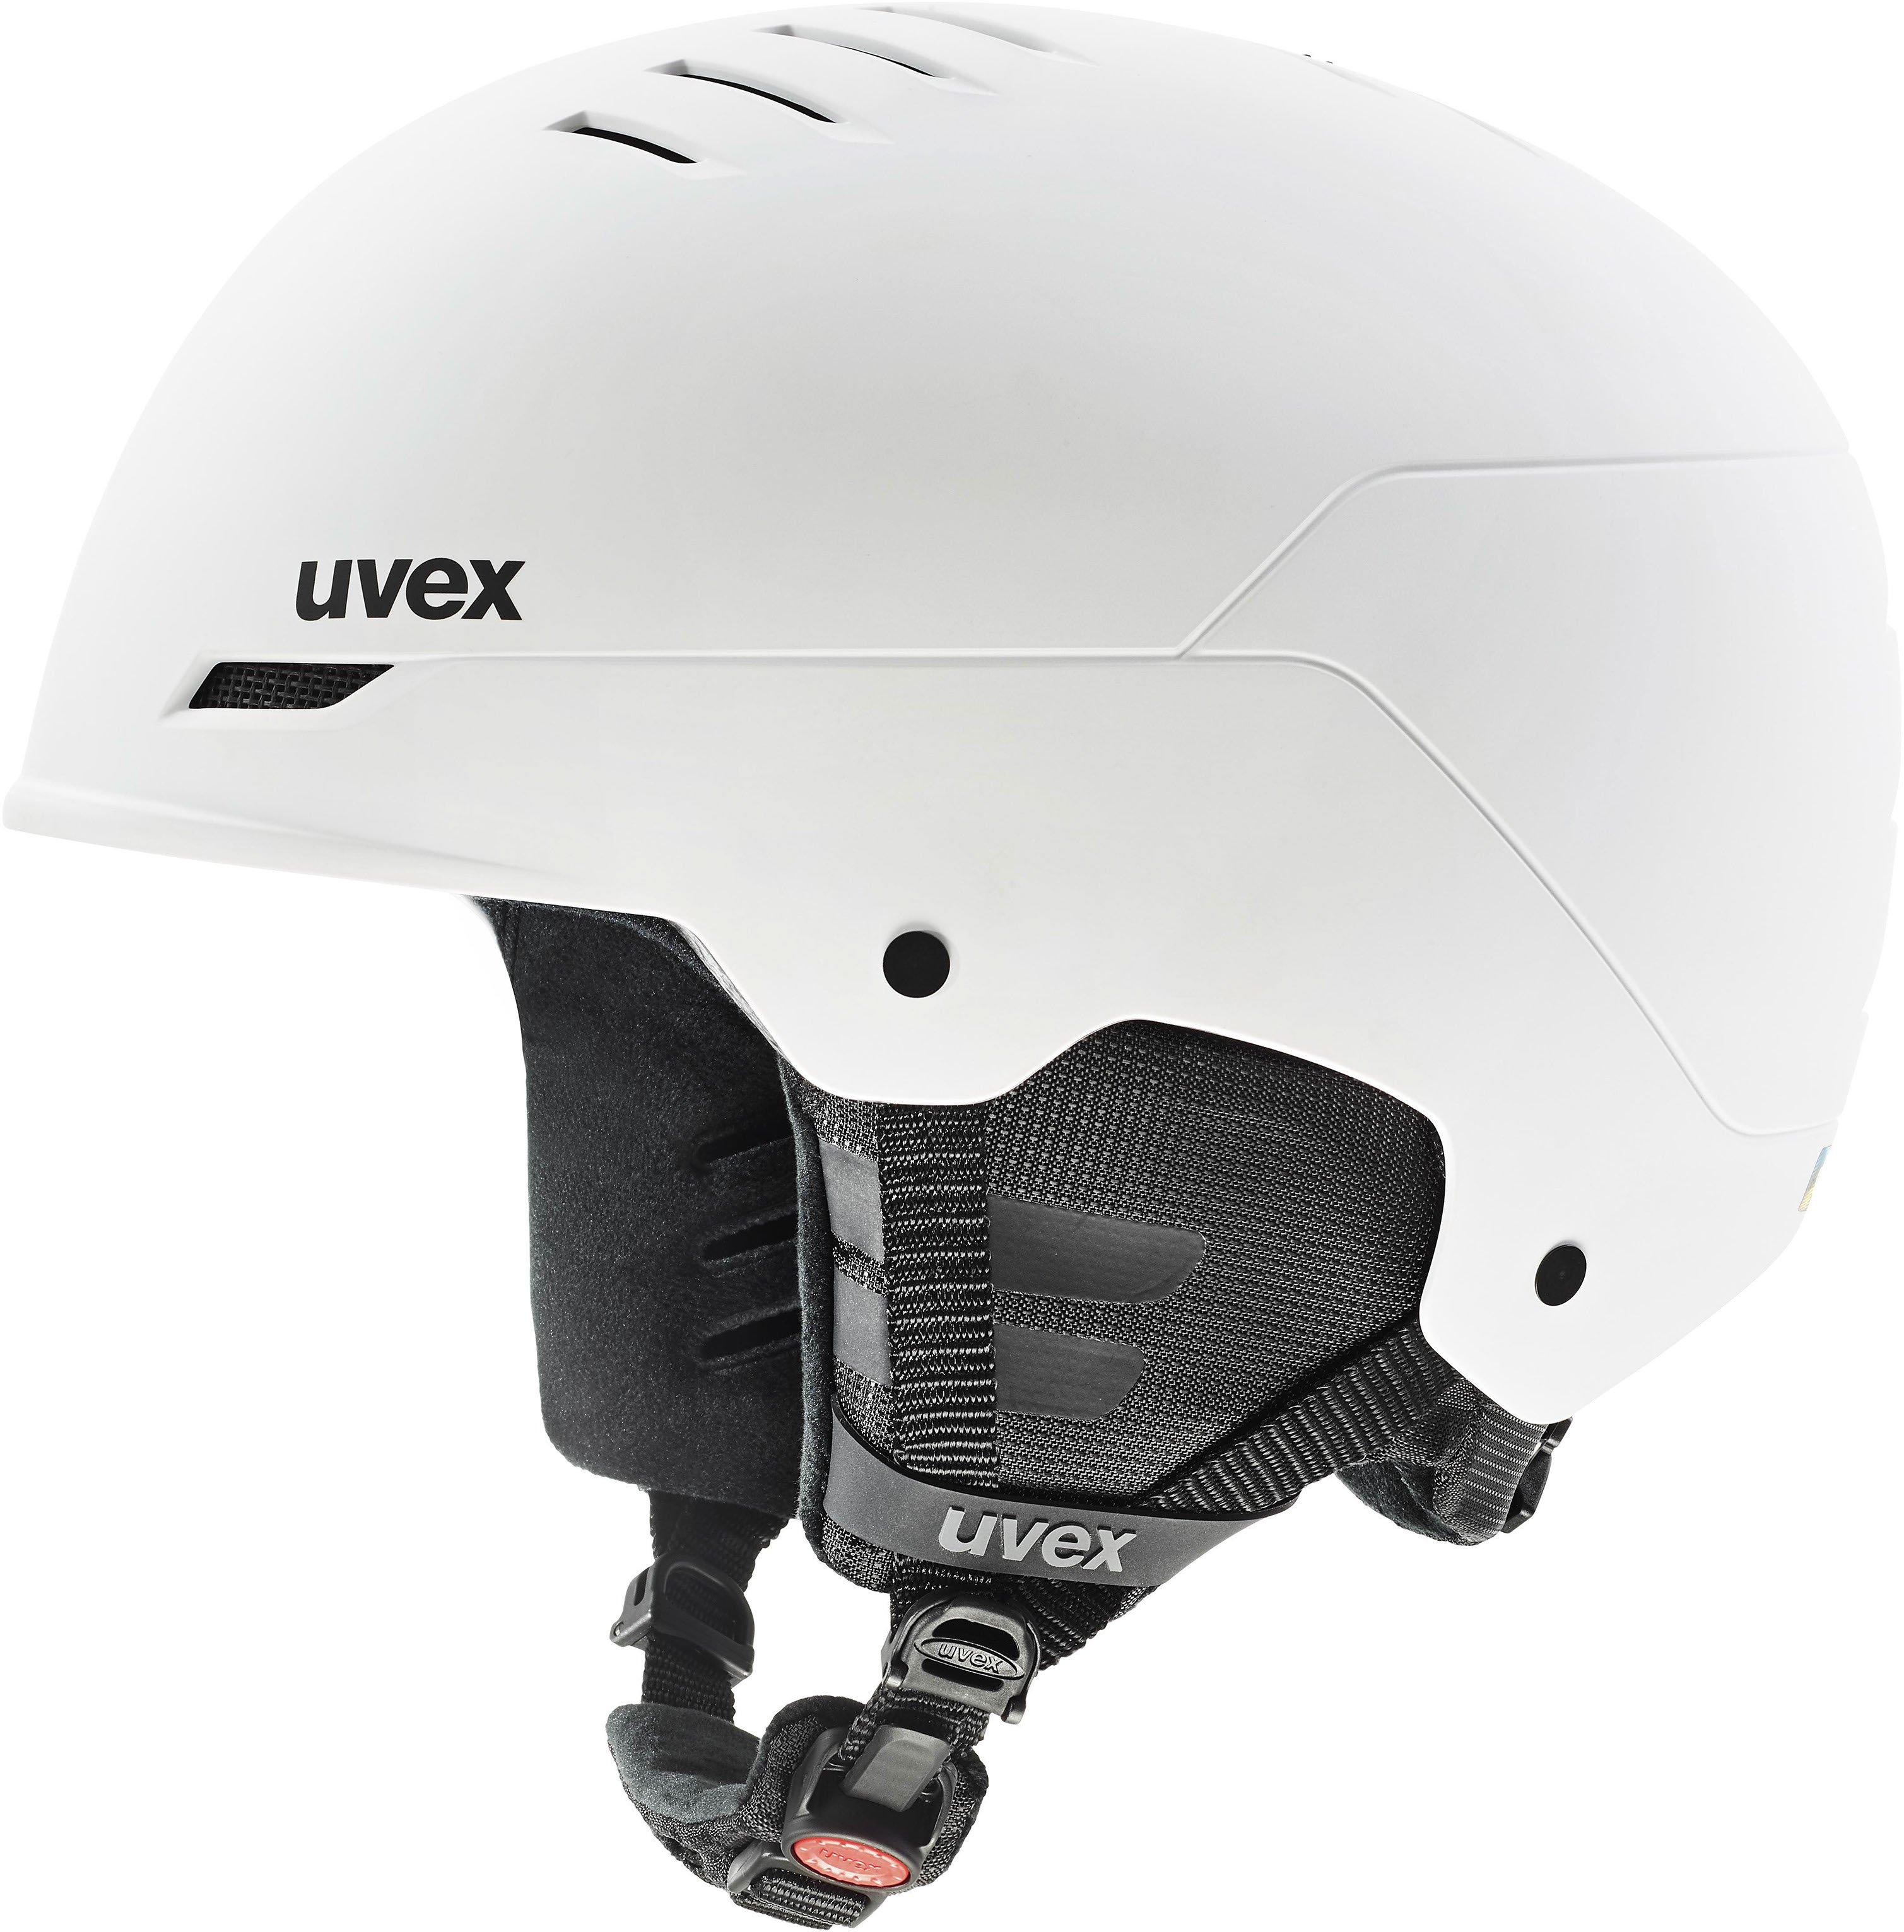 Uvex Wanted 58-62 cm